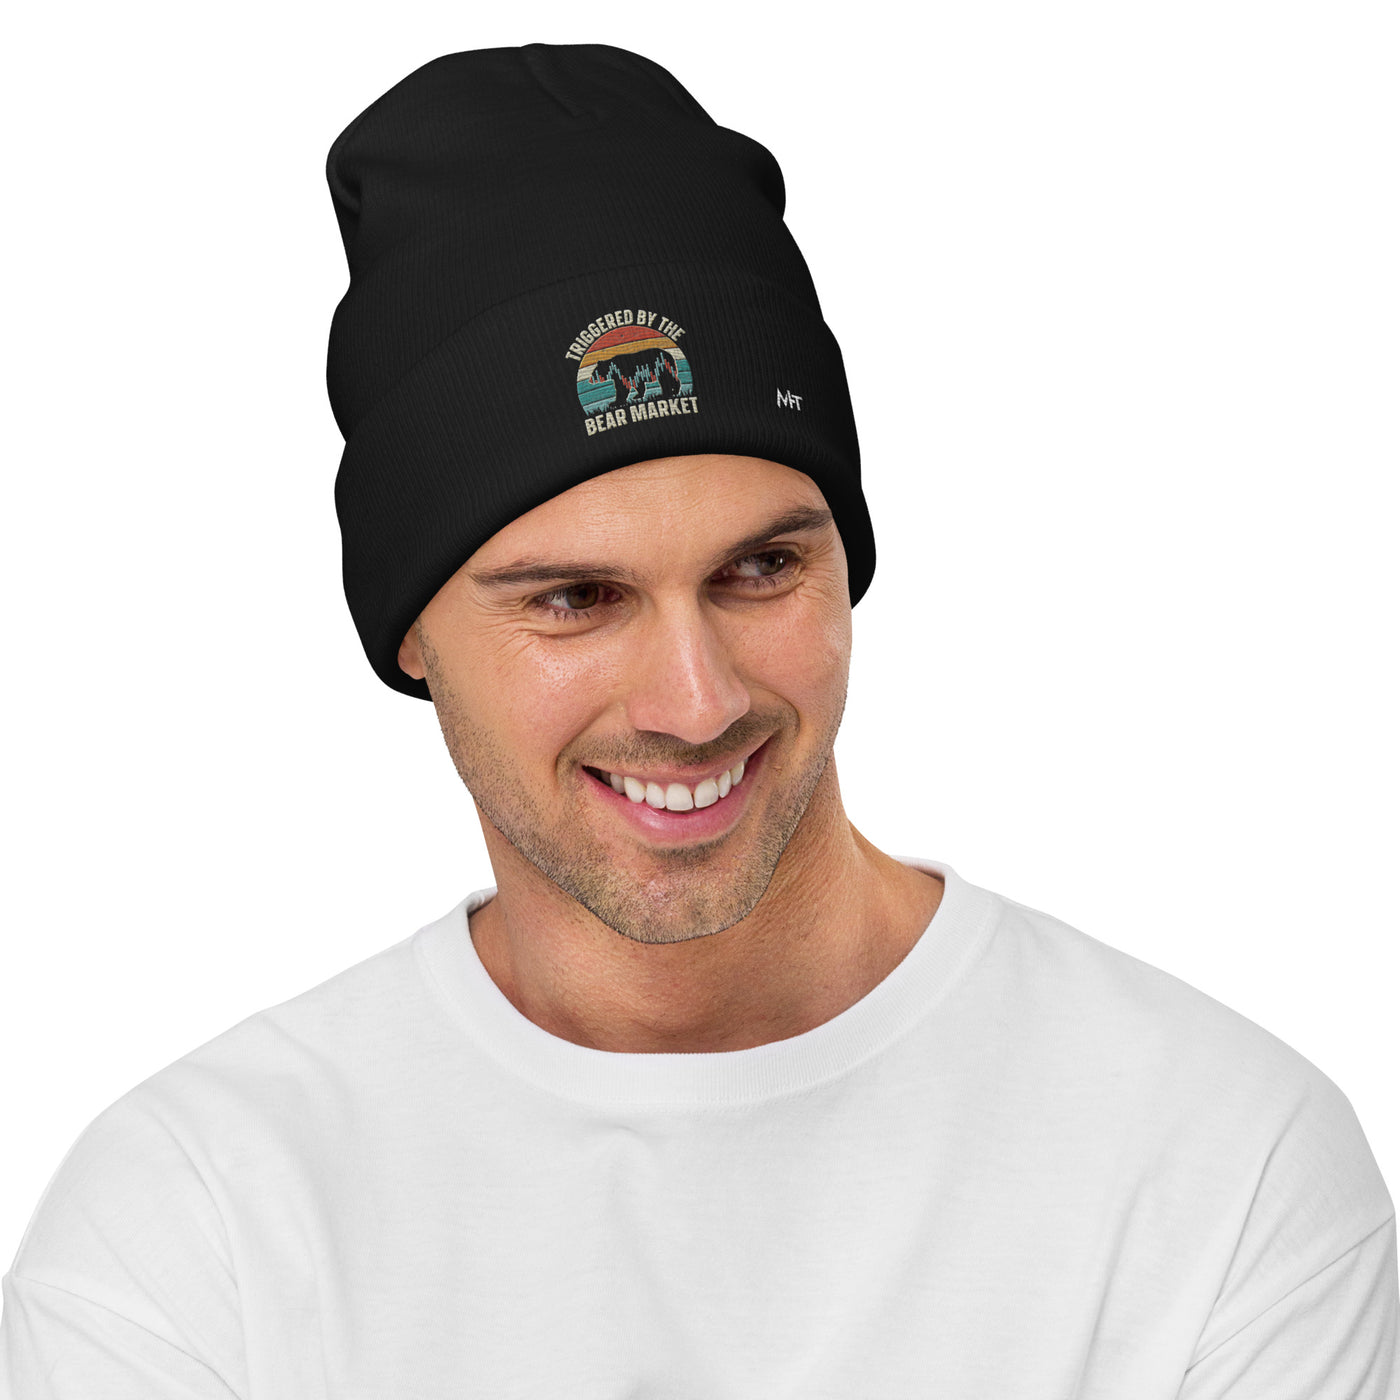 Triggered by the Bear Market - Embroidered Beanie